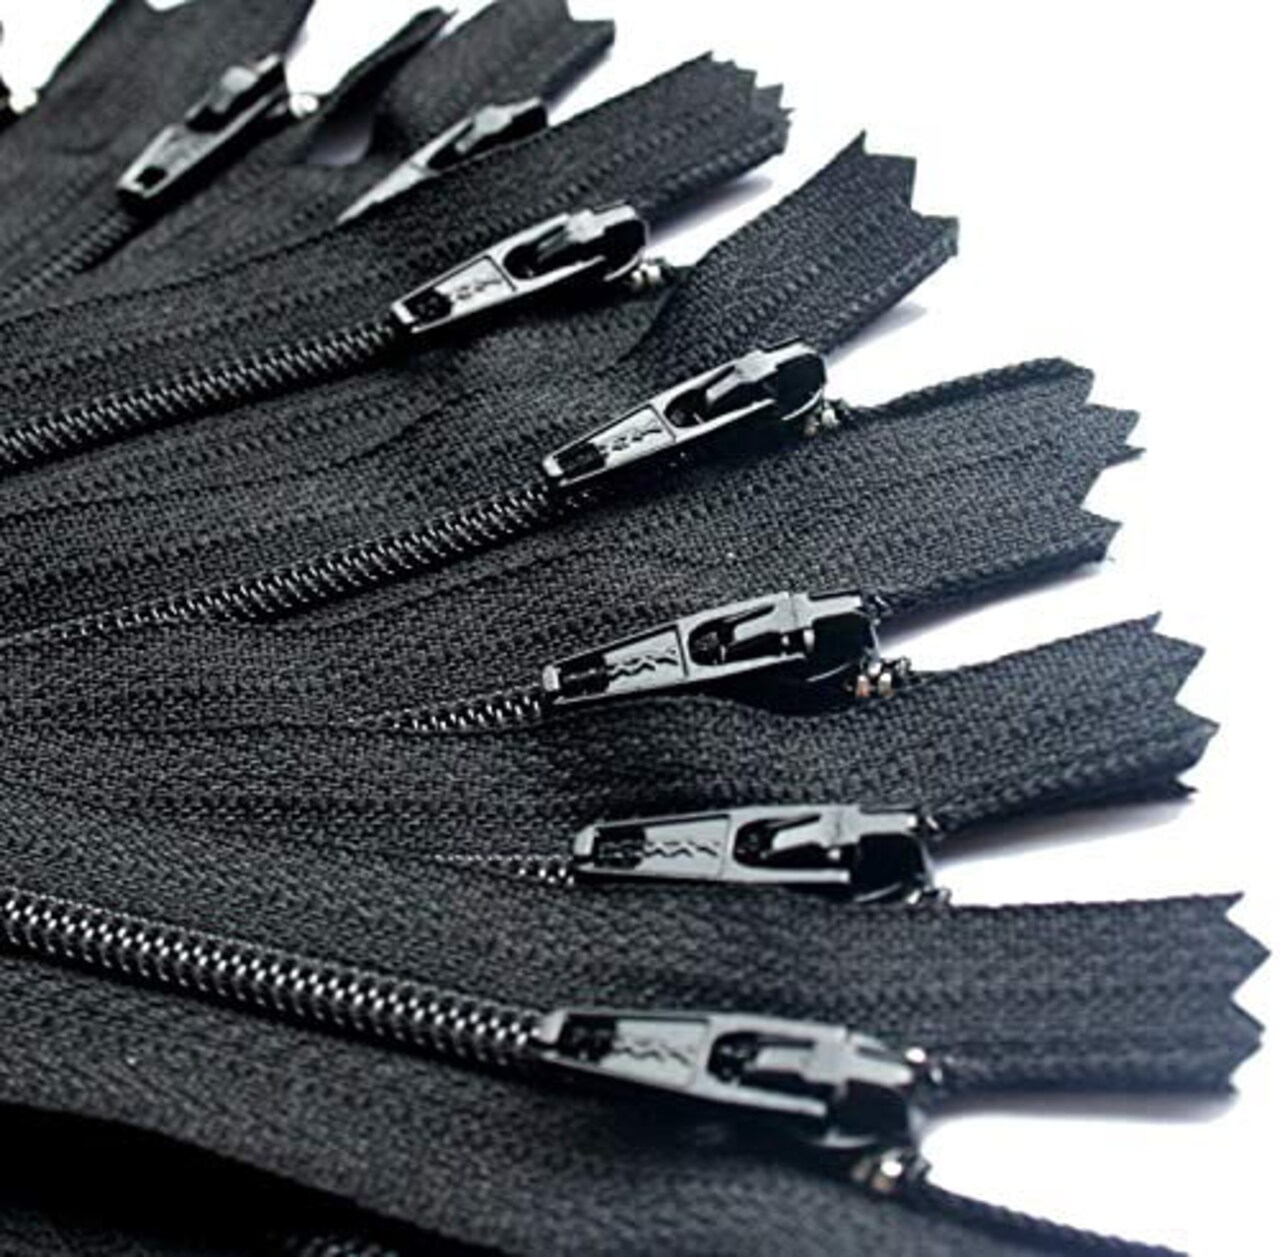 3 Skirt & Dress Black YKK Coil Closed Bottom Zippers for Sewing Craft &  Apparel - Choose Your Length - Made in The United States (100 Zippers Per  Pack) (4 Inches)